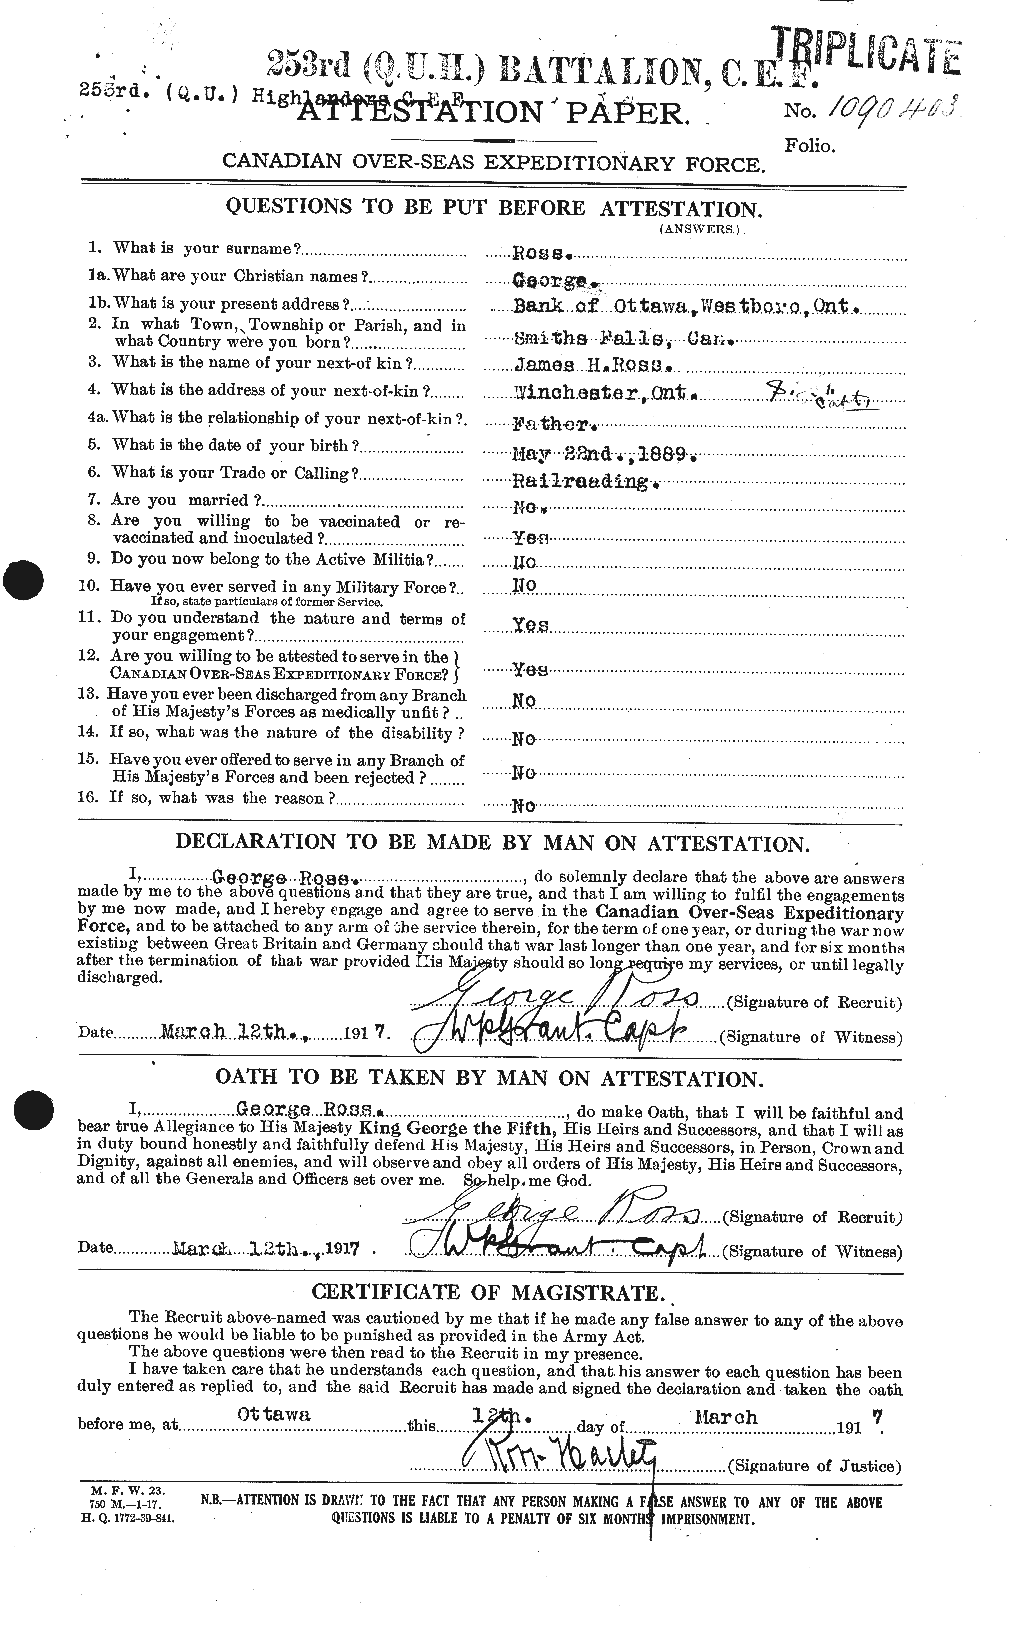 Personnel Records of the First World War - CEF 613059a